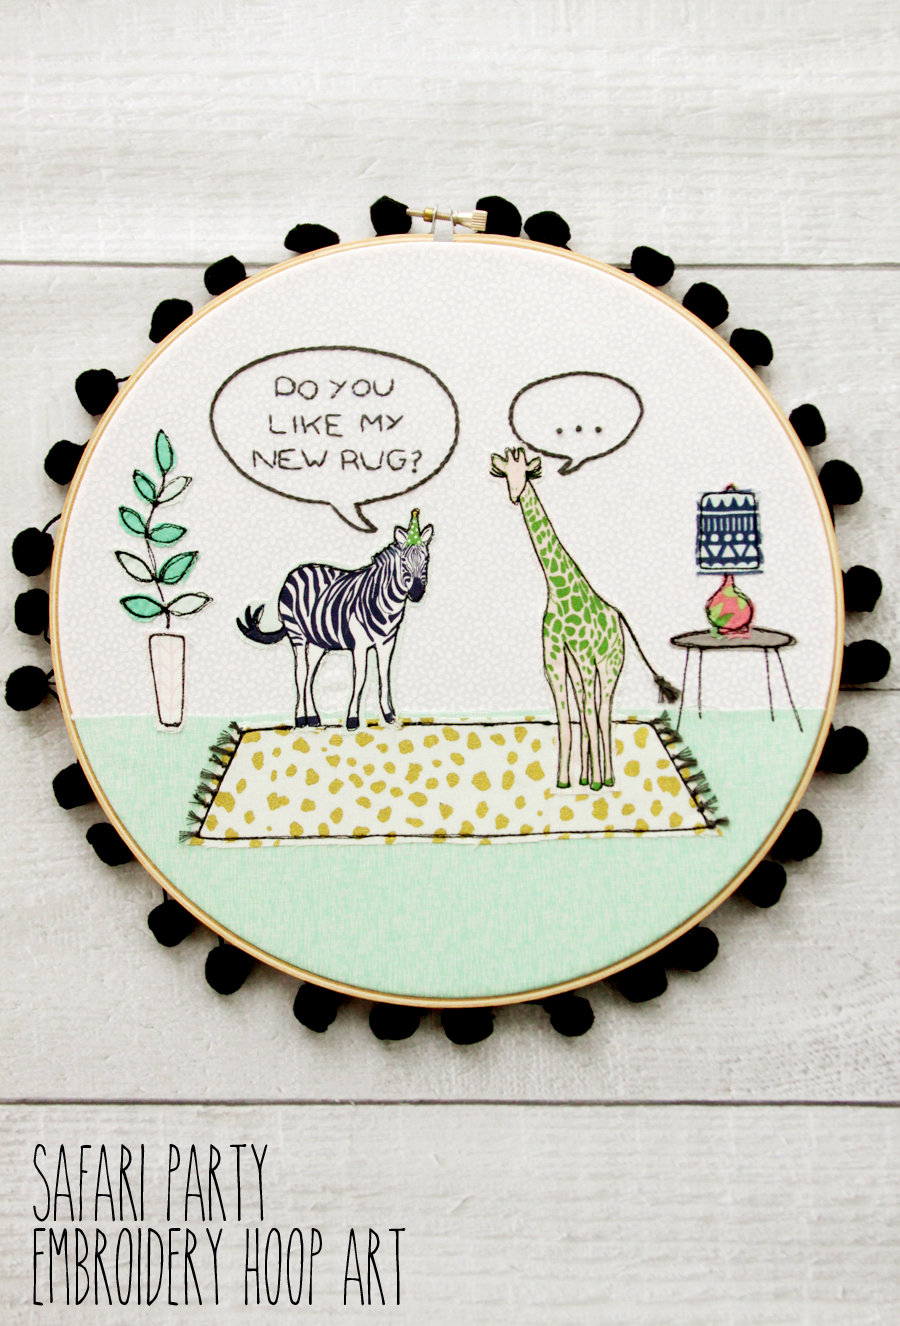 Funny Embroidery Patterns Embroidery And Sewing Patterns